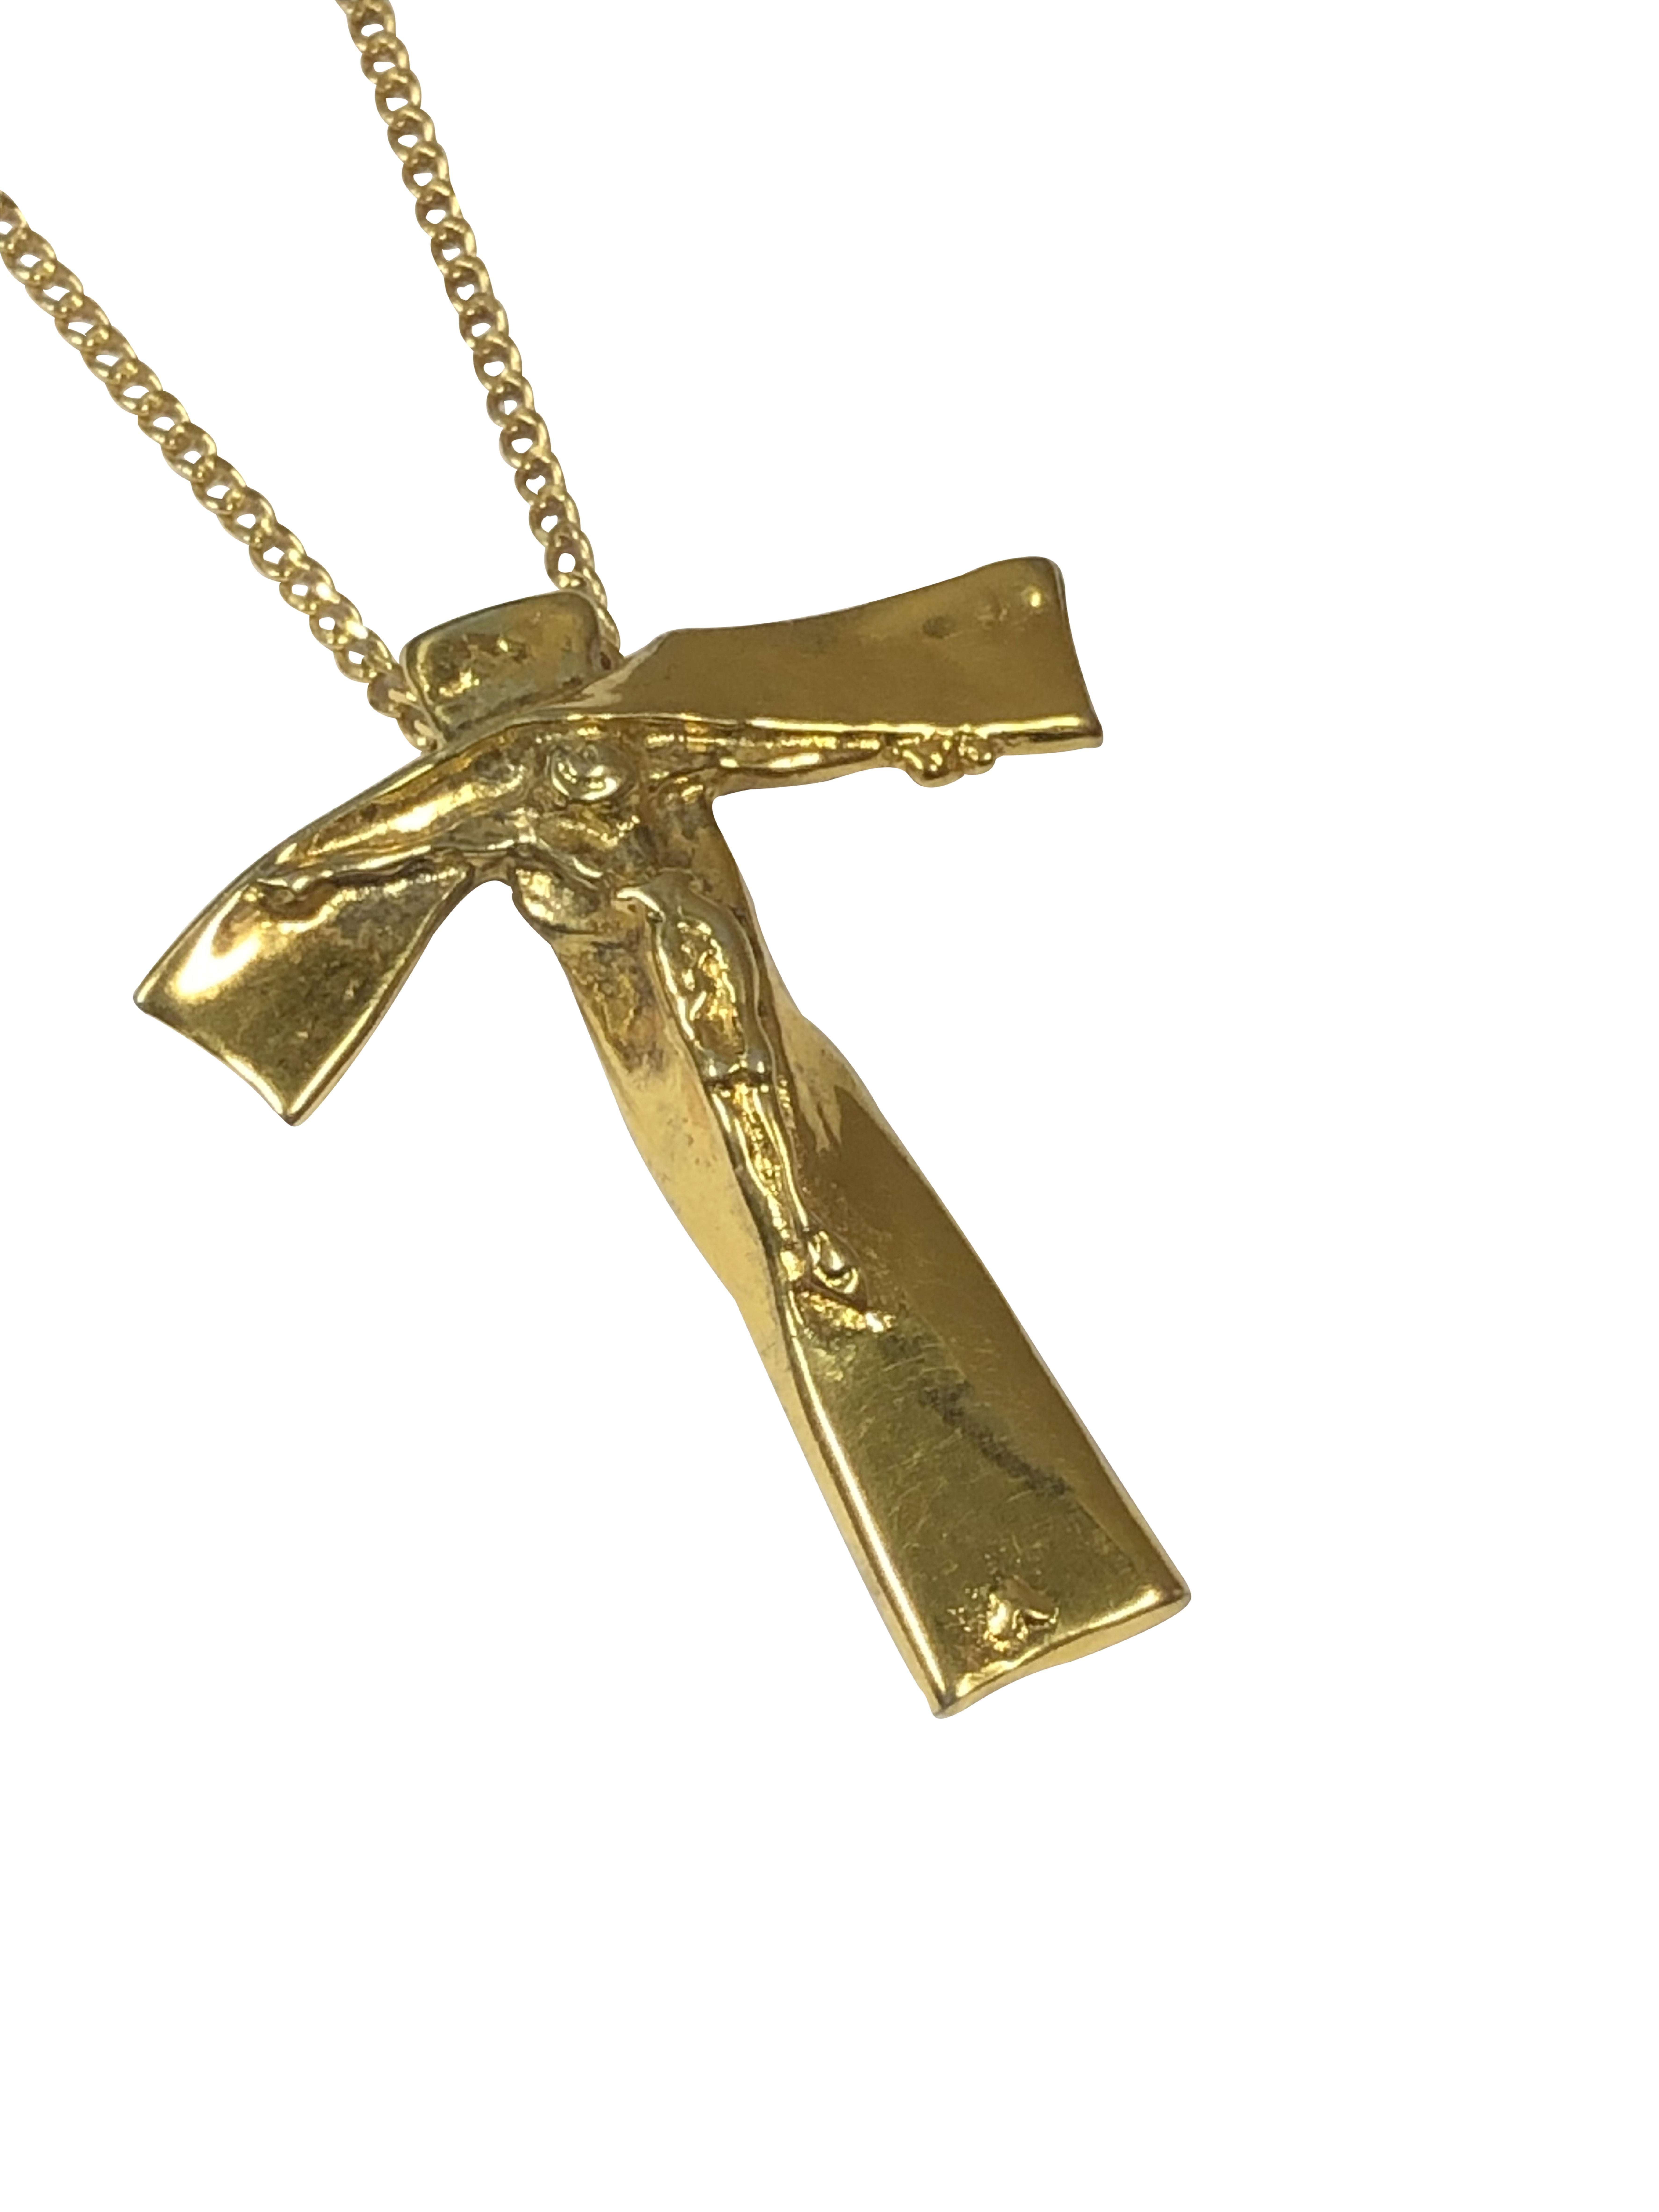 Circa 1972 Salvadore Dali Christ of St. John of the Cross, Vermeil ( Gold plate on Sterling silver ) Pendant Necklace, measuring 1 3/4 inches in length X 1 3/8 inches. Suspended from a Vermeil Box link 16 inch chain. 